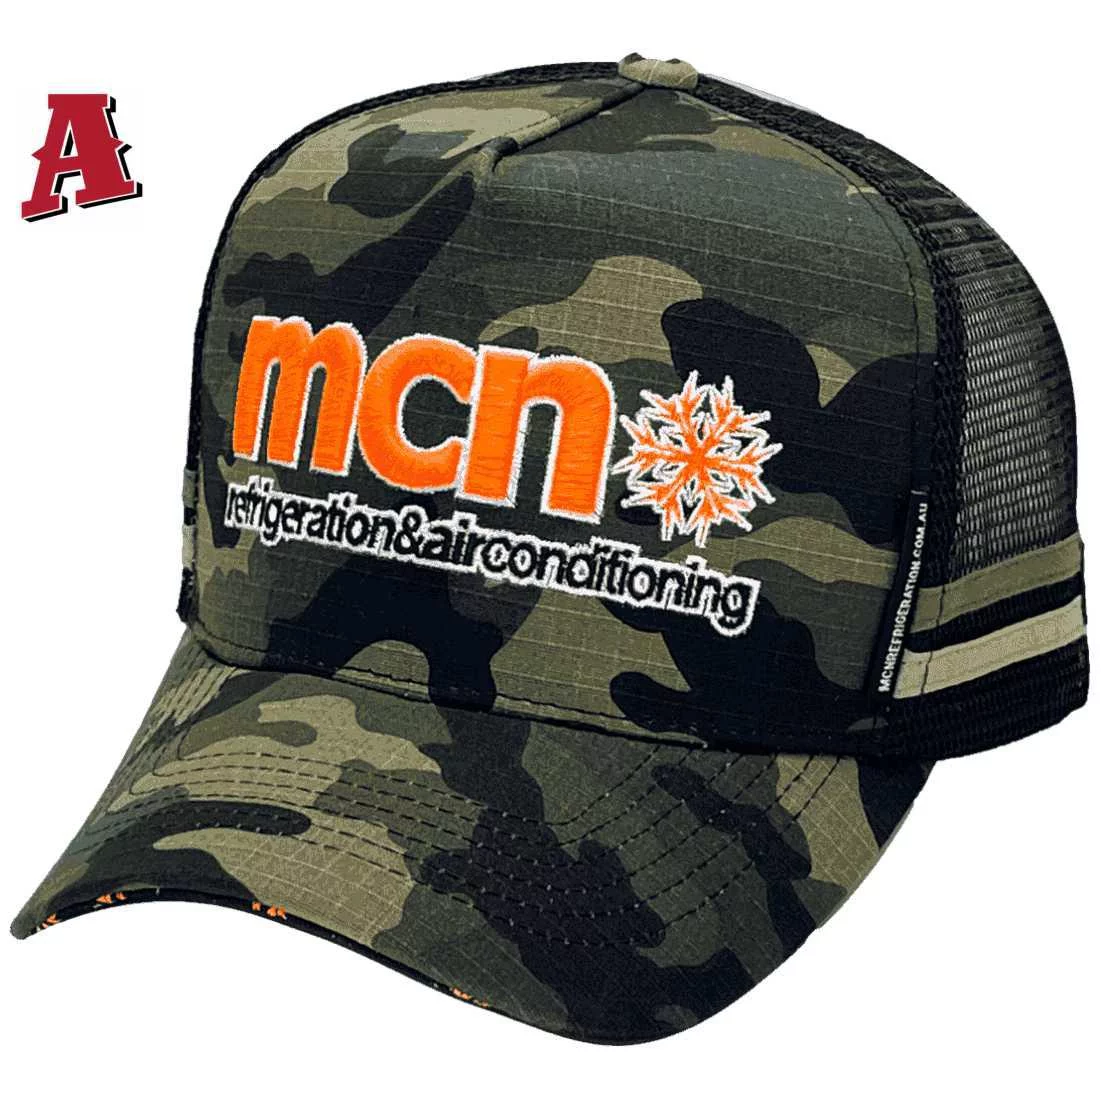 MCN Refrigeration & Airconditioning Ripstop Camo Kempsey NSW HP Midrange Aussie Trucker Hat with Double Side Bands and Australian Head Fit Crown Ripstop Green Camo